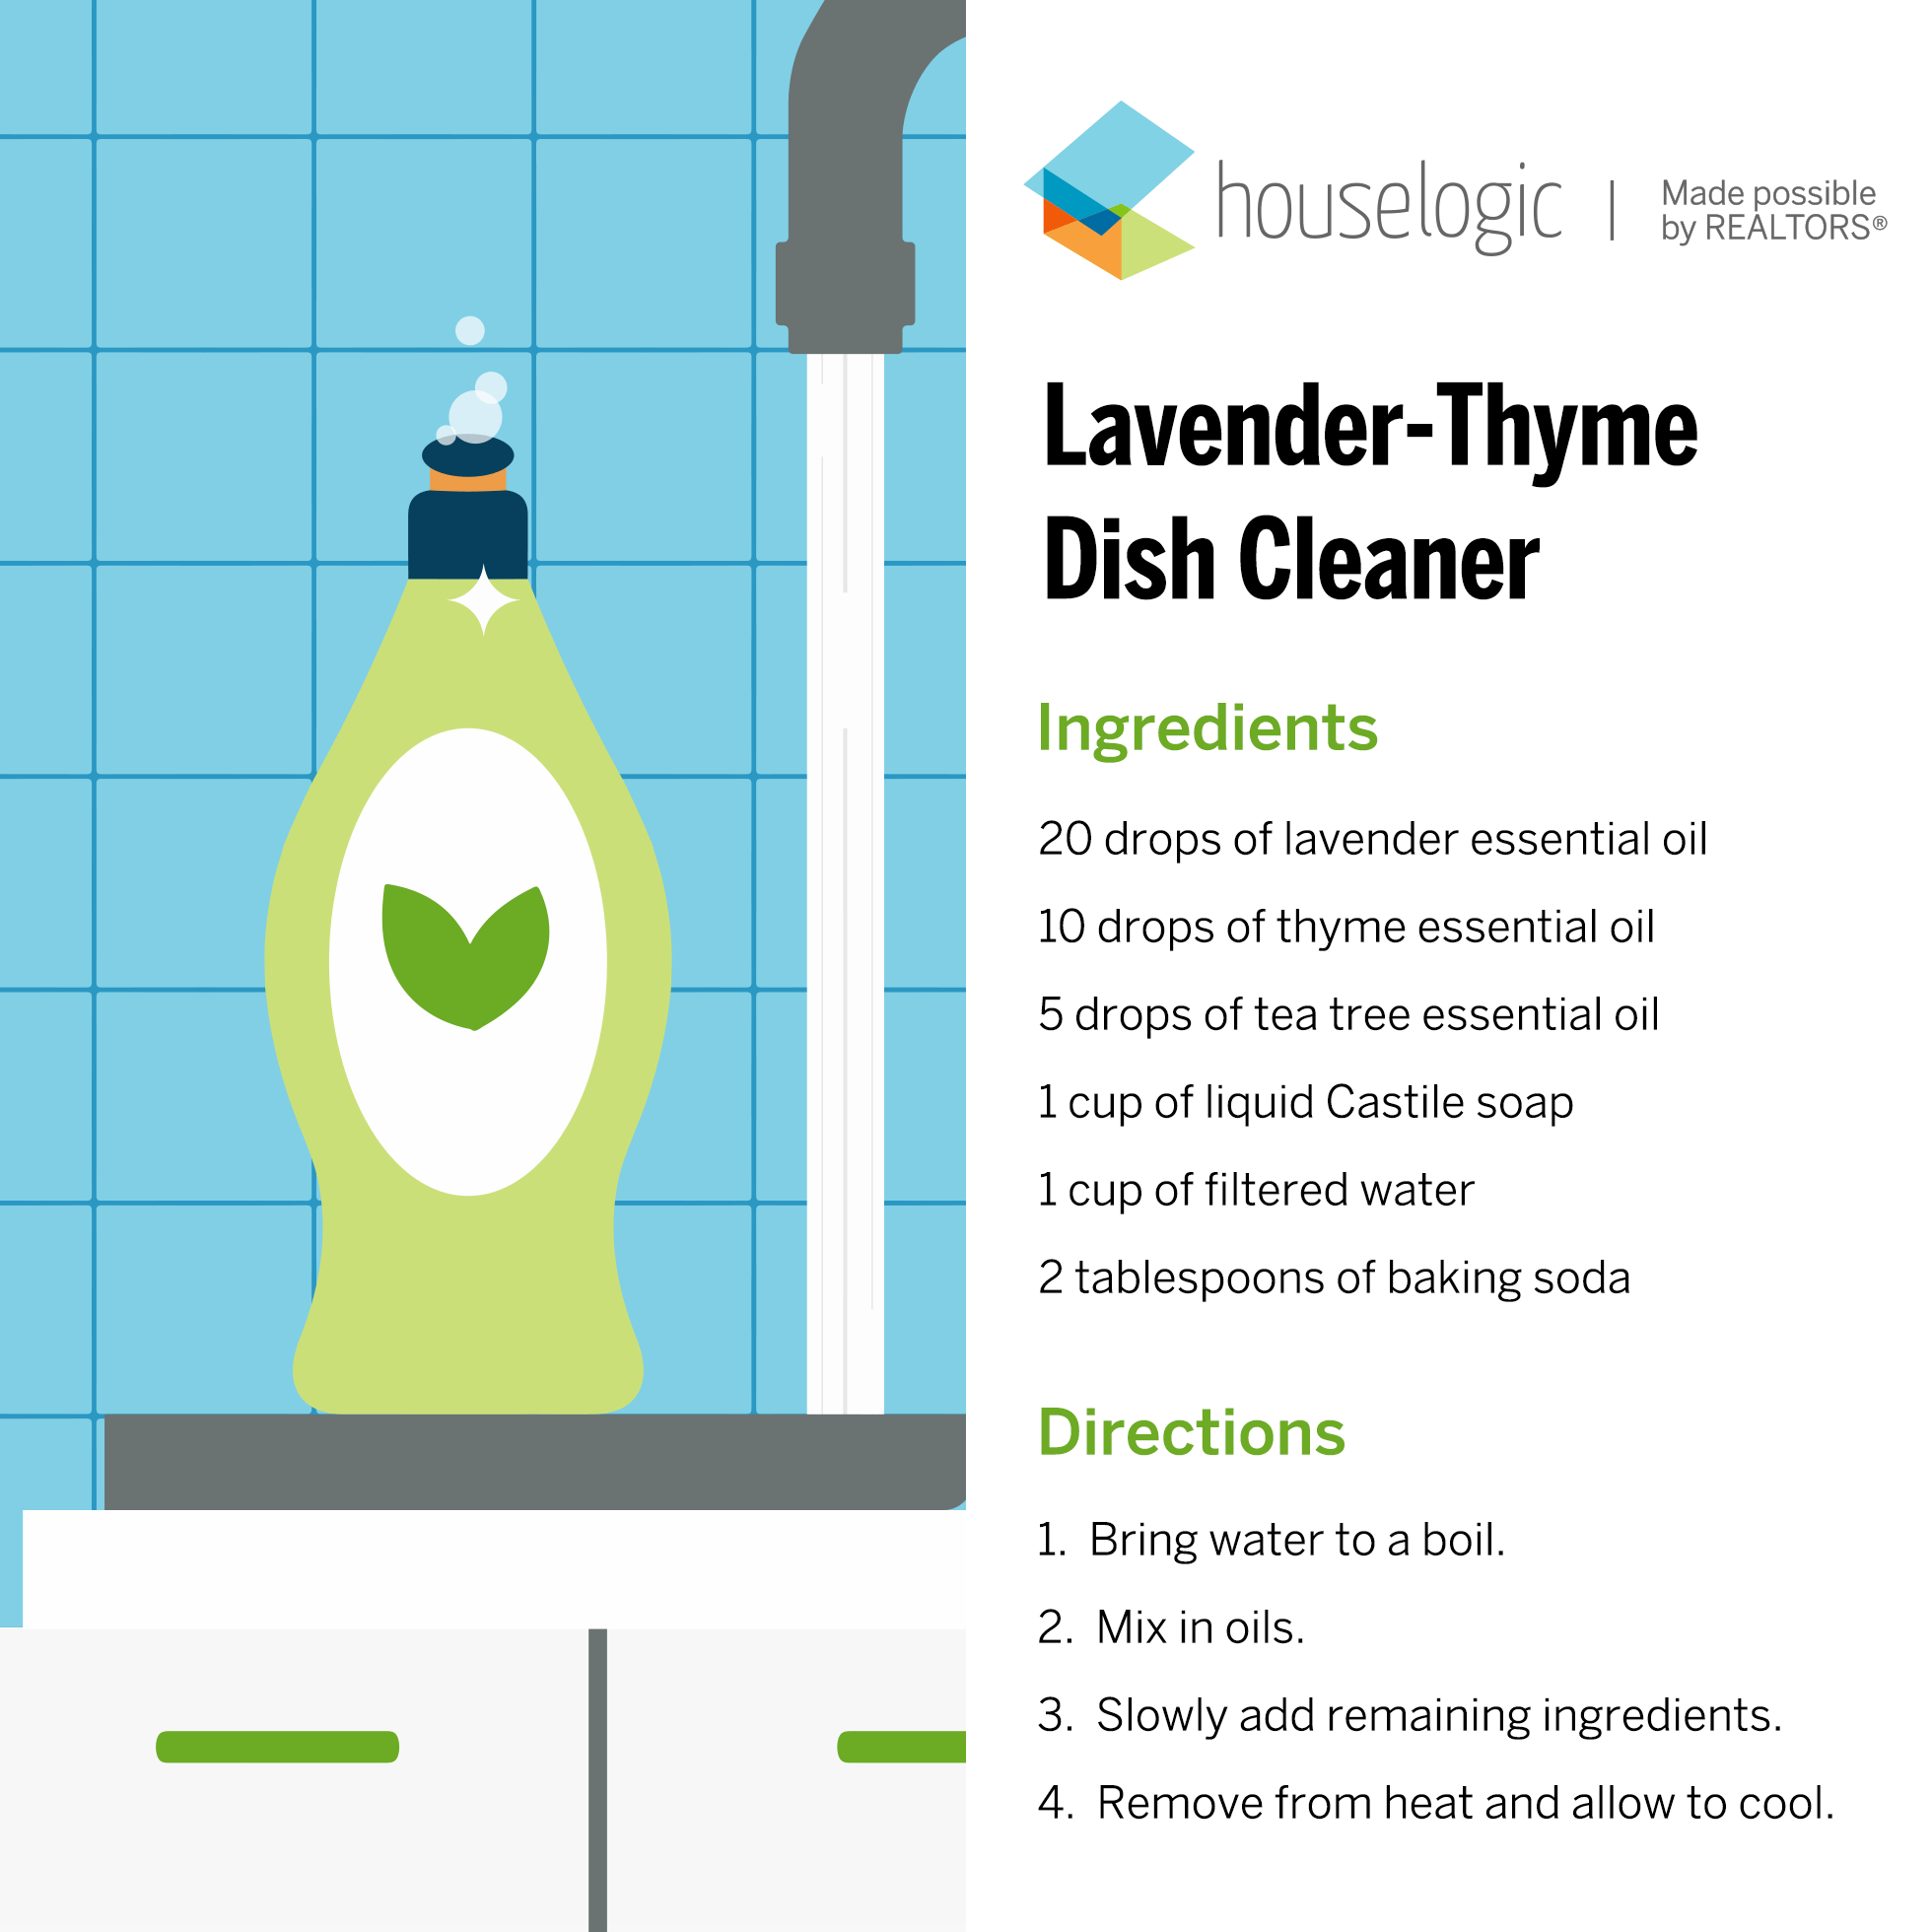 homemade dish cleaner animation of a green bottle squeezing out bubbles over a sink with running water with blue tile background with the recipe for lavender-thyme dish cleaner